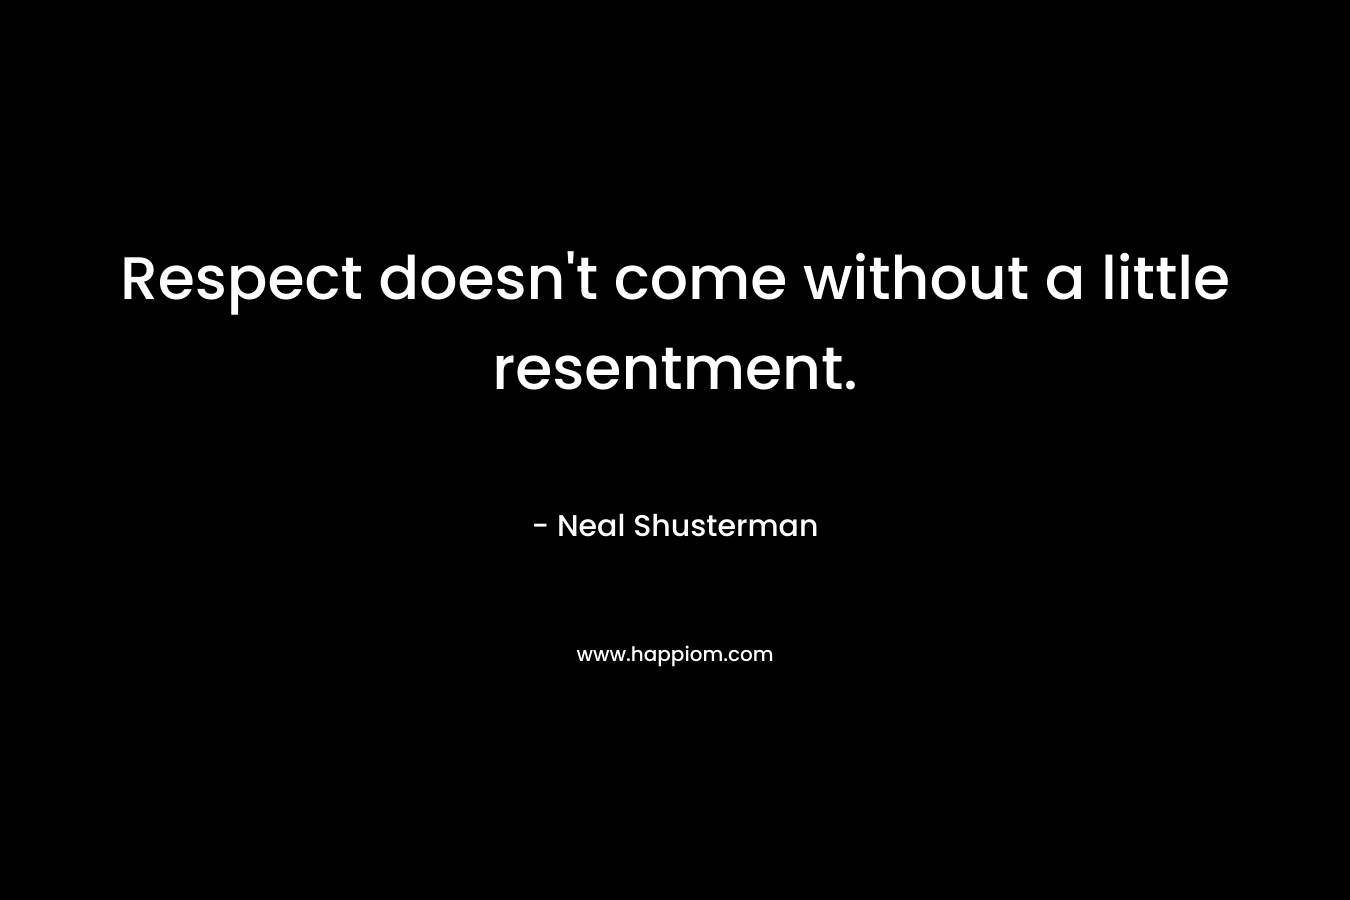 Respect doesn't come without a little resentment.